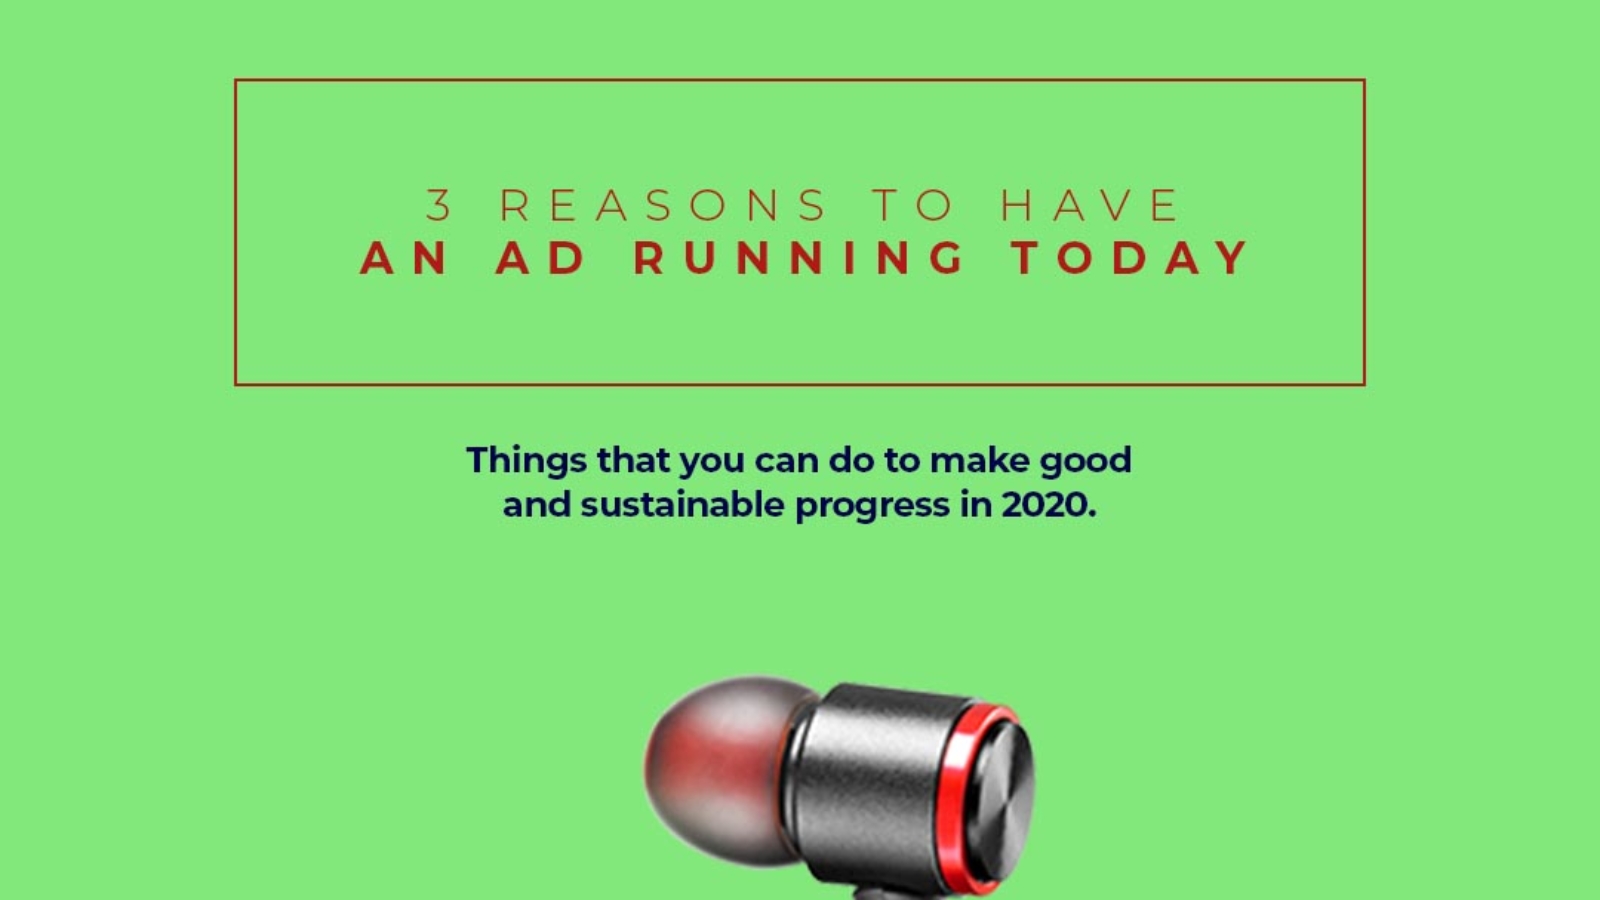 Swipe-Podcast-s01e02-3 Reasons To Have an ad running today 1080